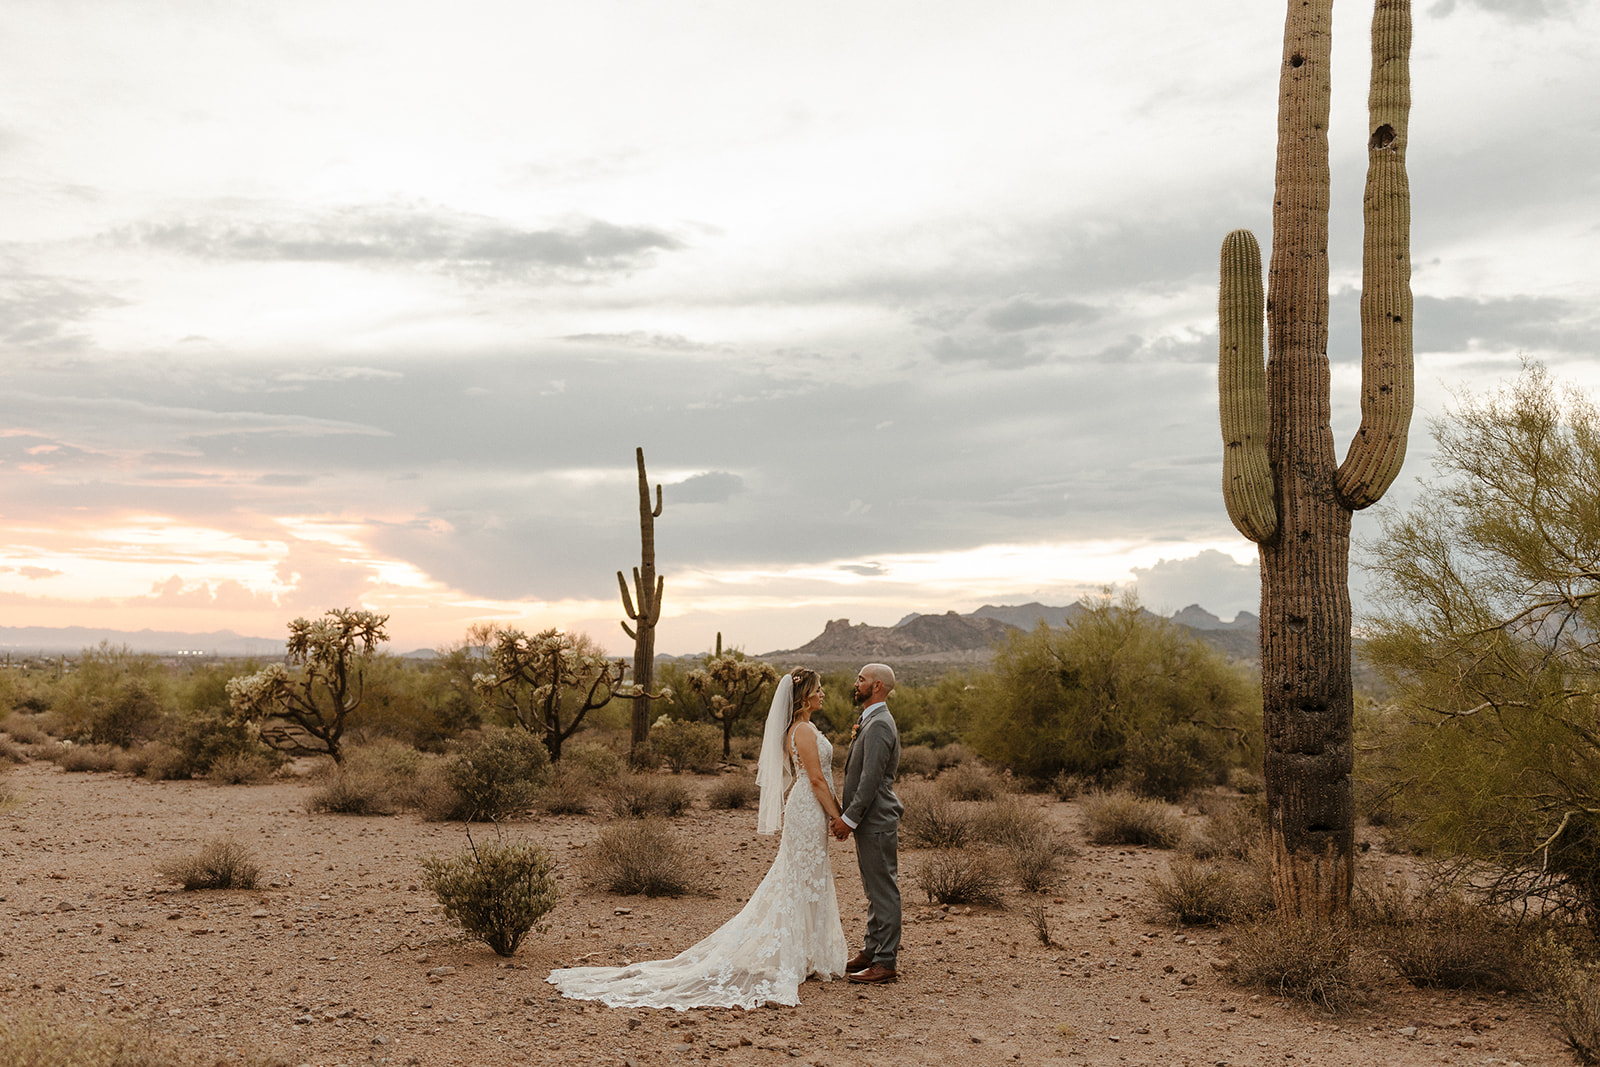 Stunning bride and groom pose at lost dutchman state park after their dreamy AZ wedding day